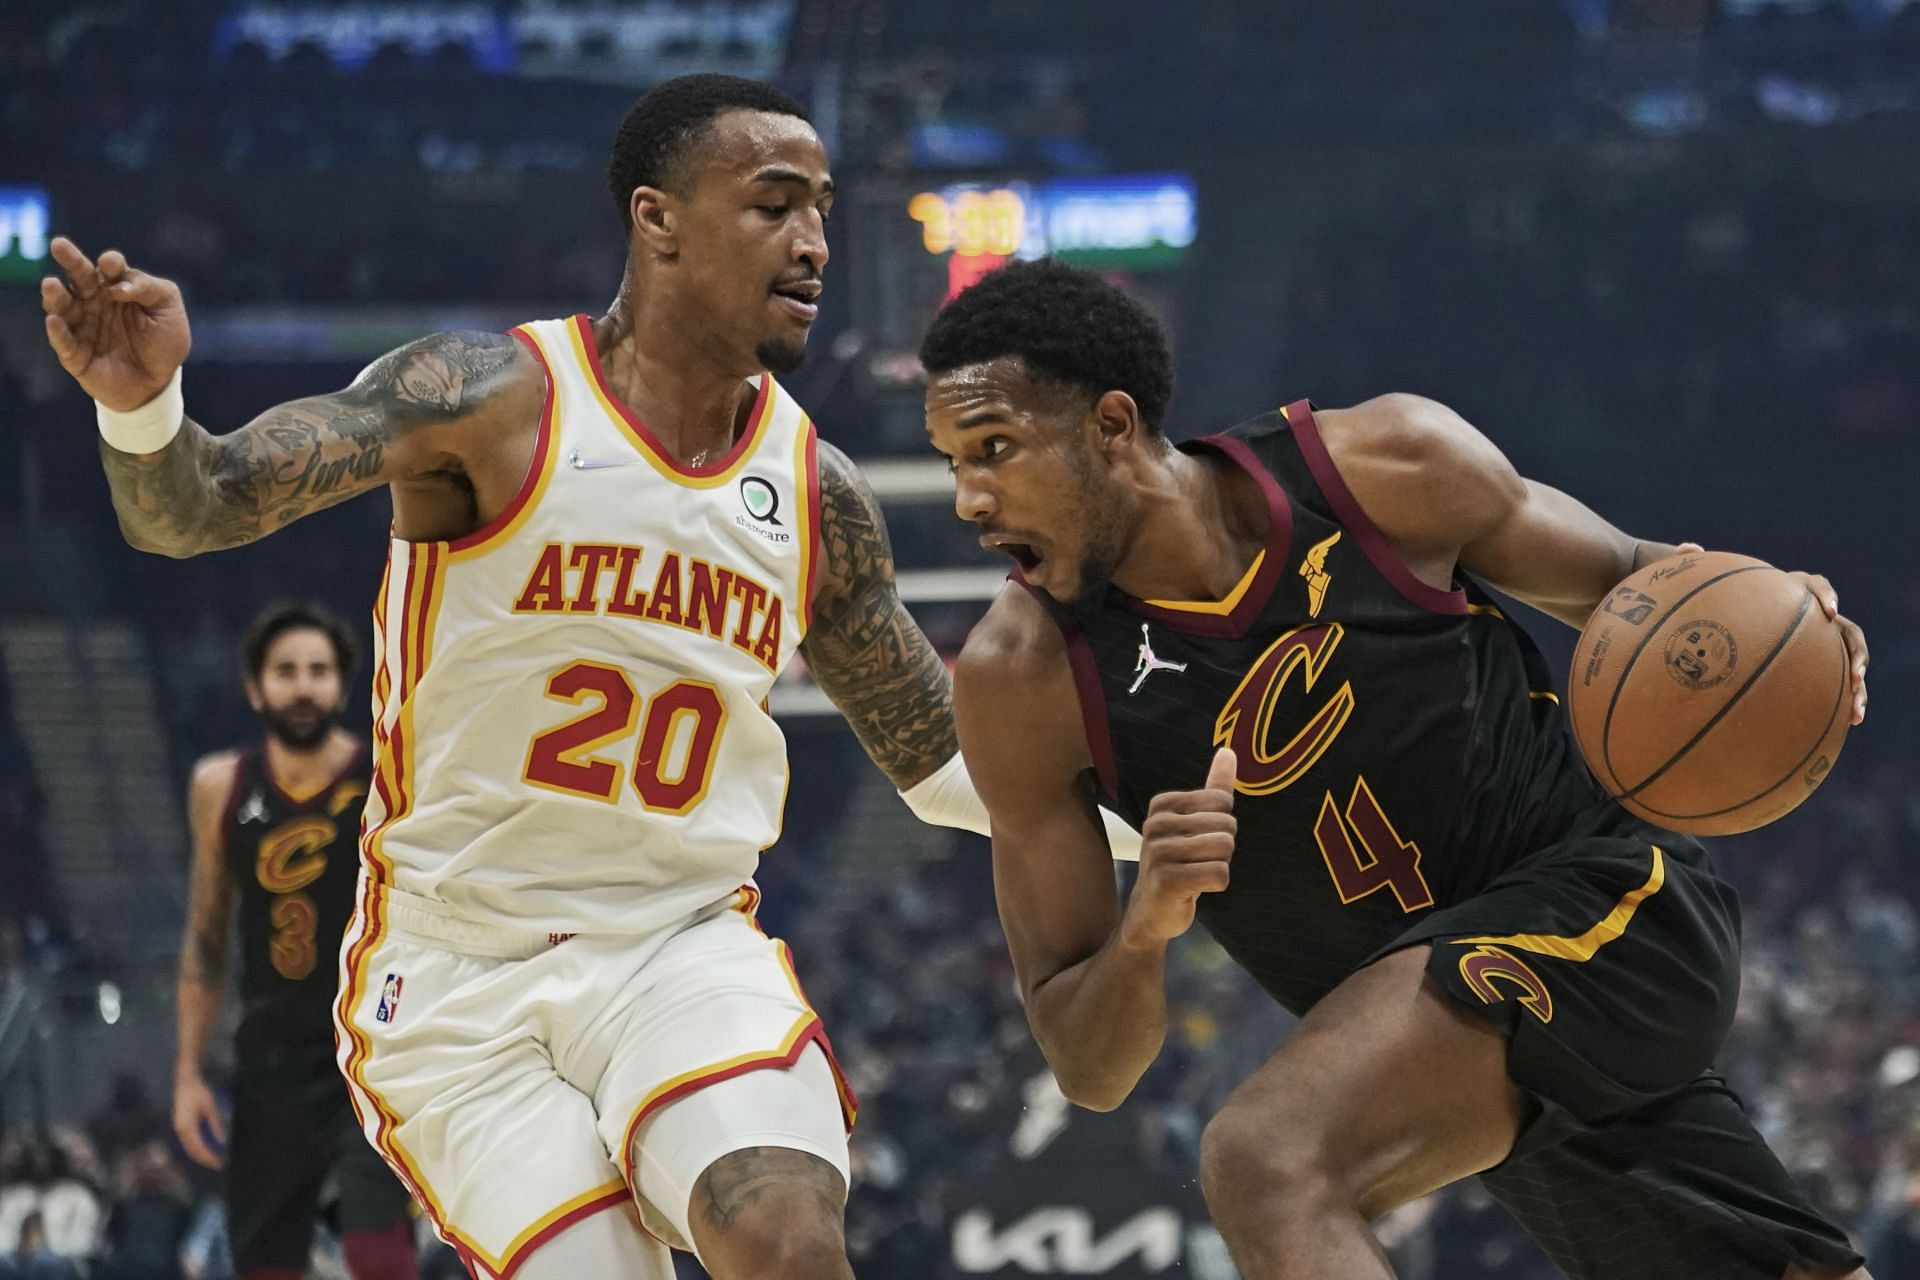 The Atlanta Hawks are hoping to even the season series against the short-handed Cleveland Cavaliers on Sunday. [Photo: Bleacher Report]